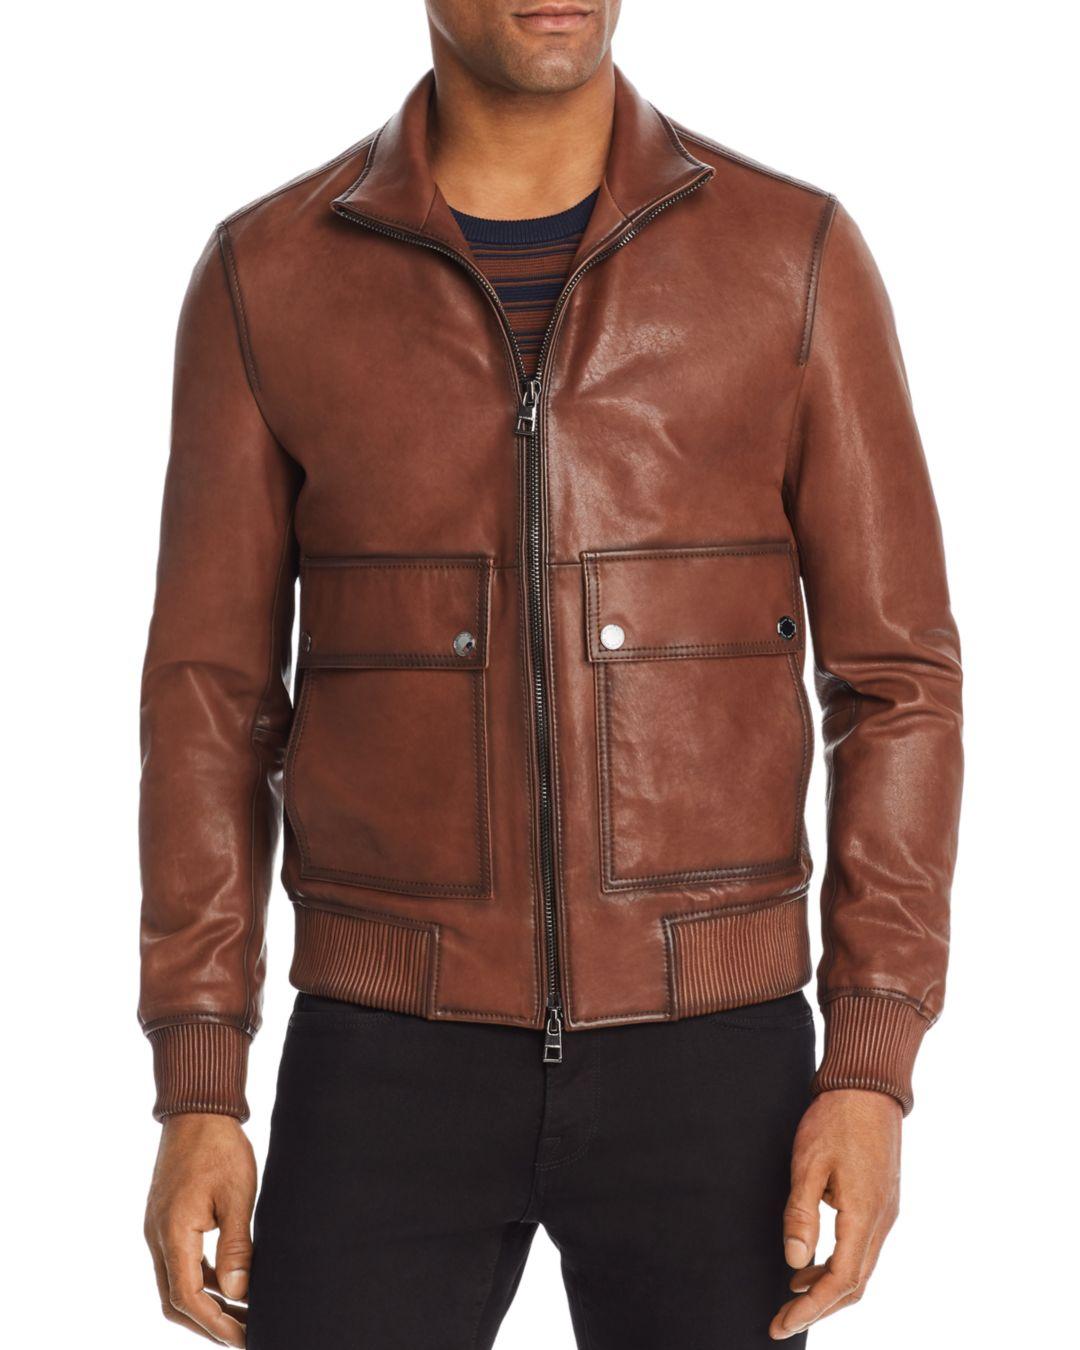 Michael Kors Burnished Leather Jacket in Brown for Men - Lyst